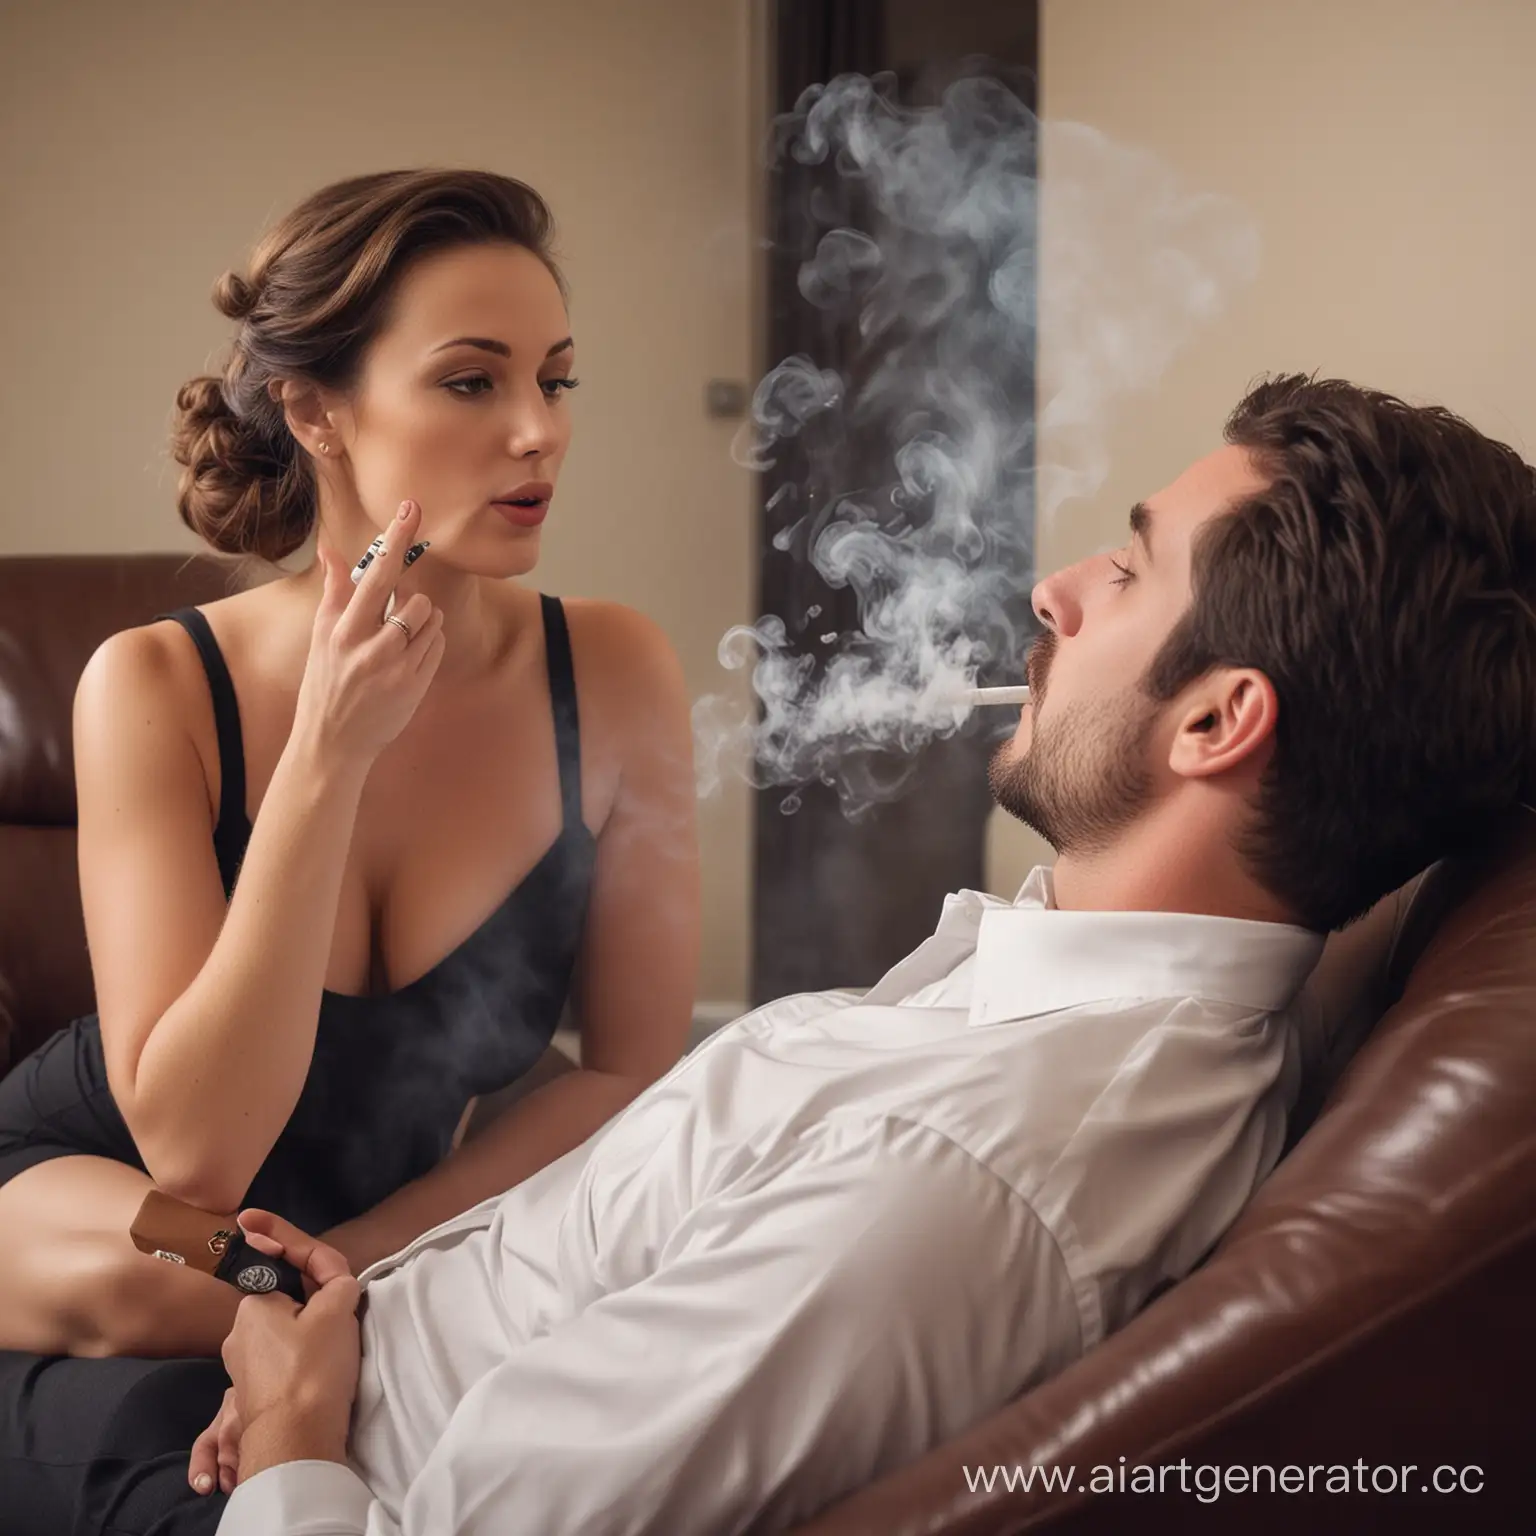 Beautiful woman therapist, with cigarette, blows smoke in male patient's face. Chase lounge. 